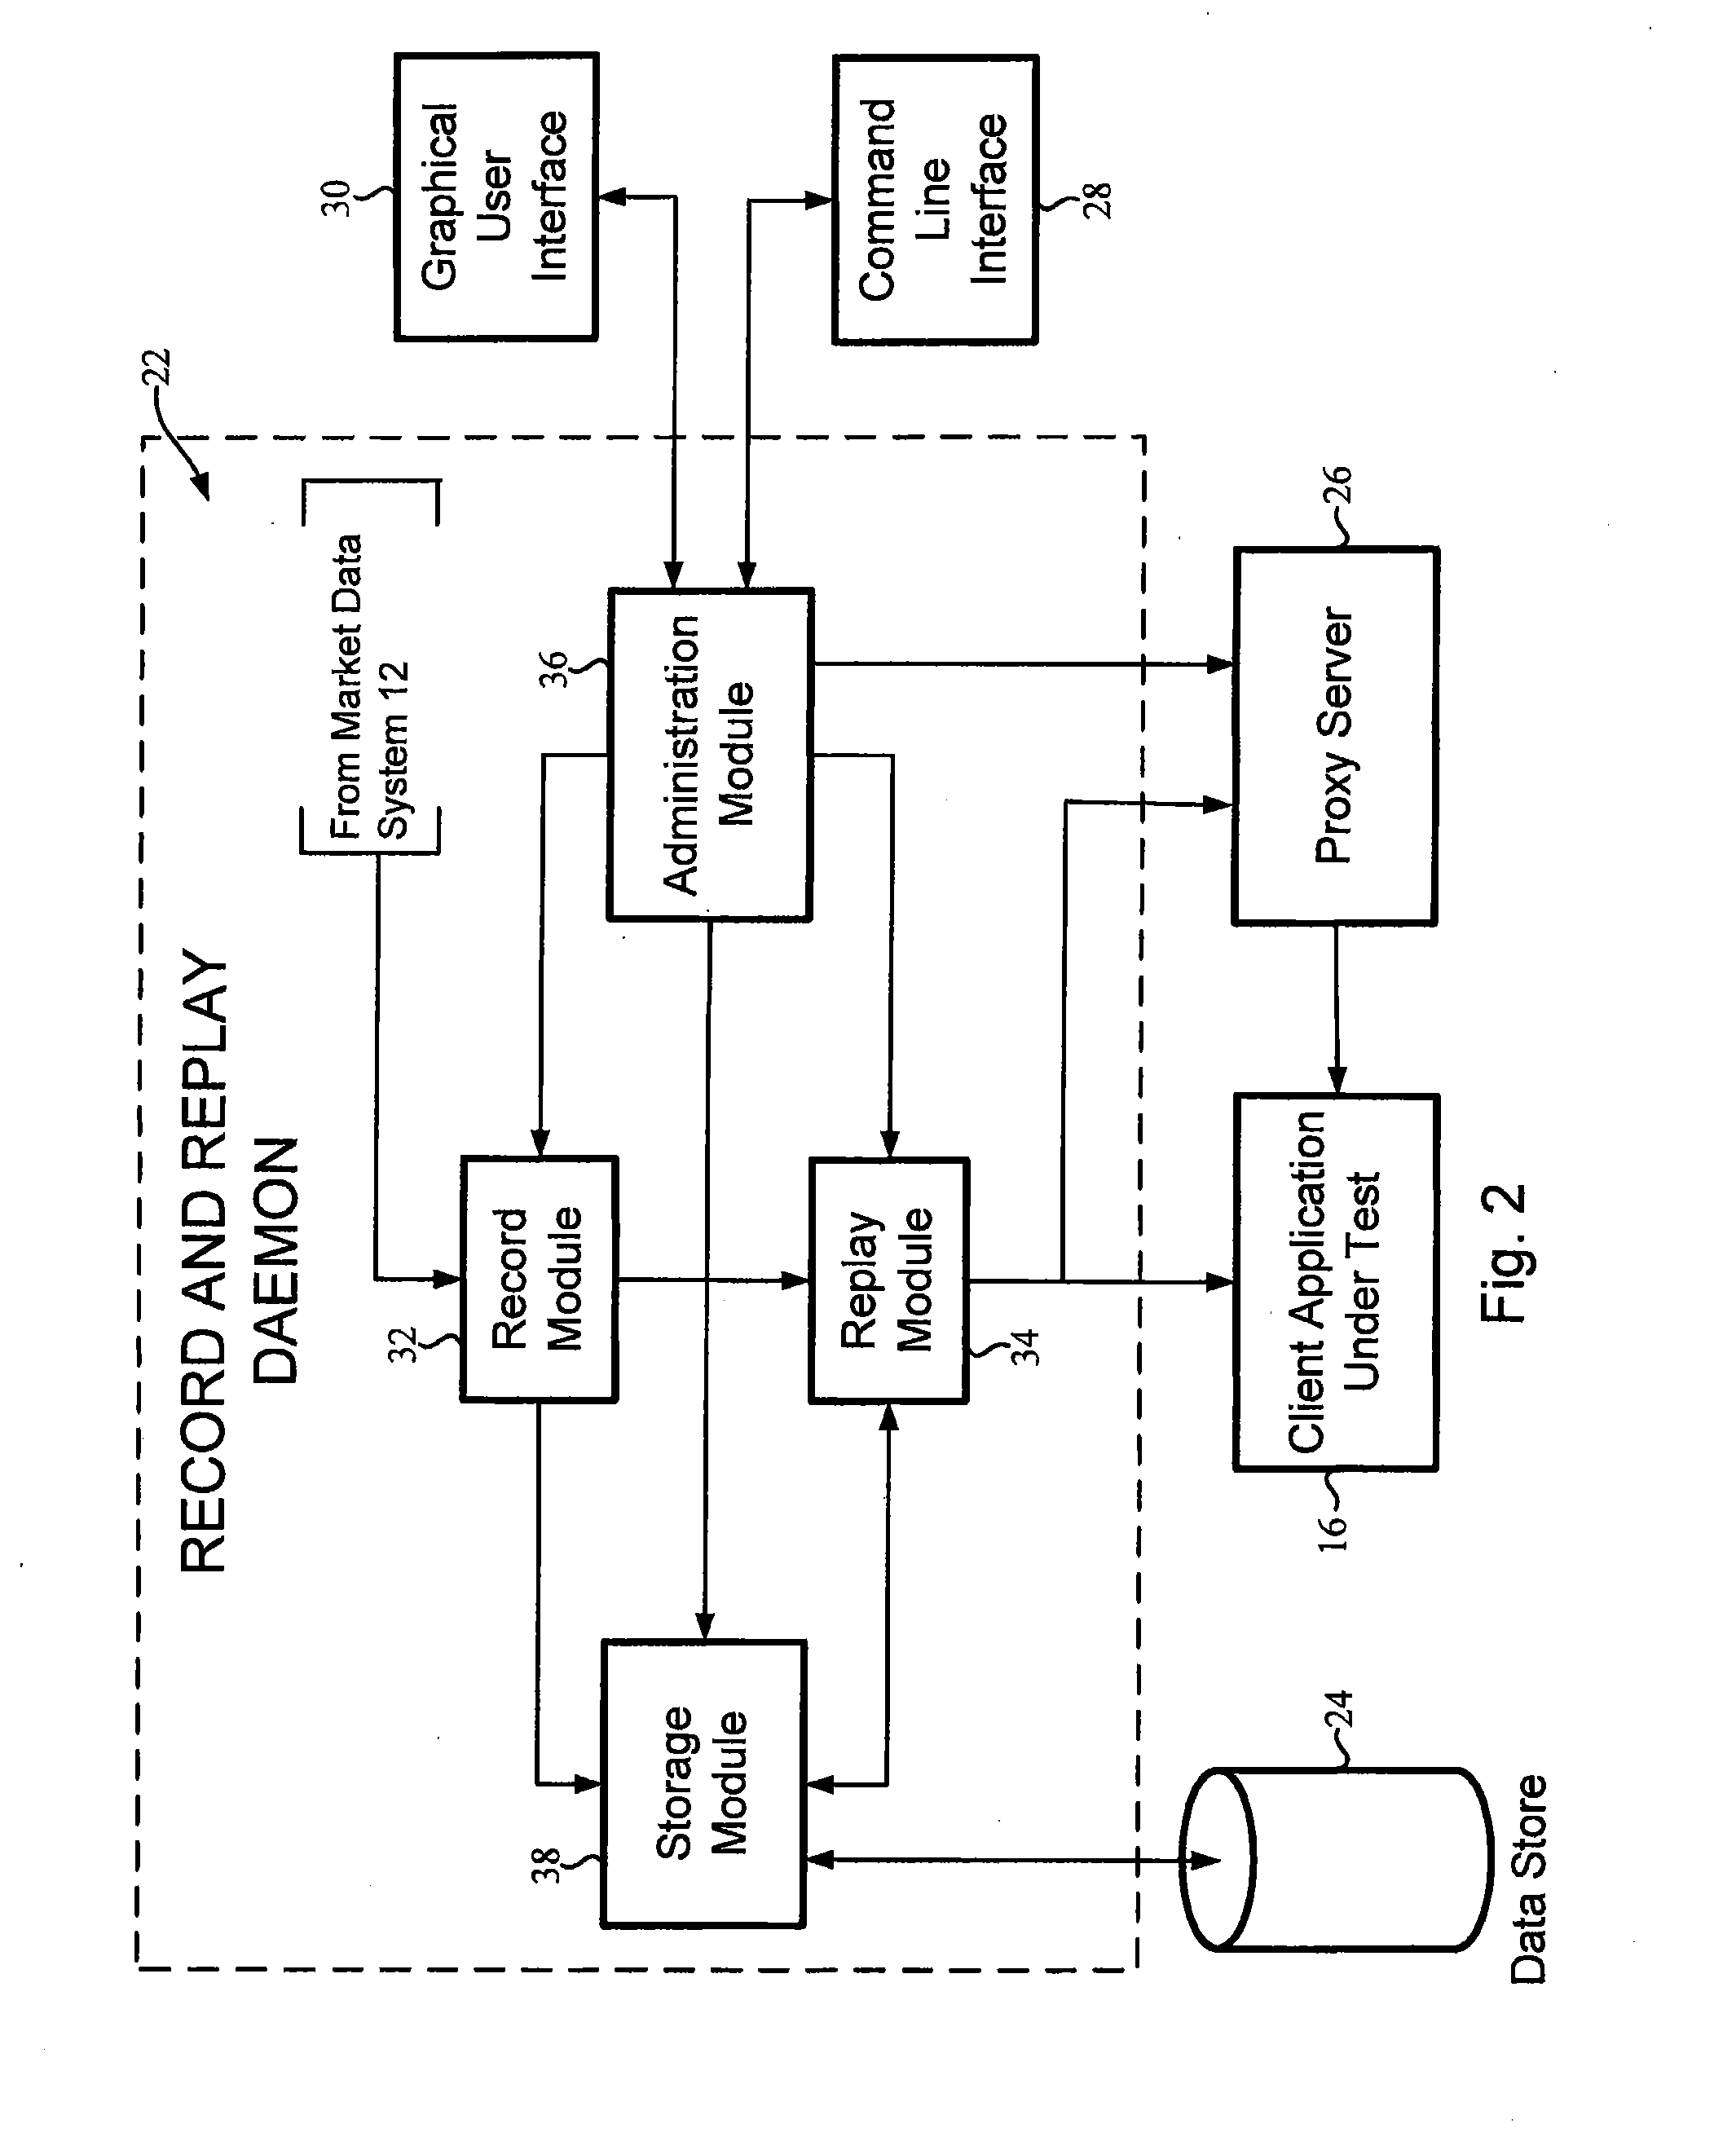 Method and system for developing and applying market data scenarios